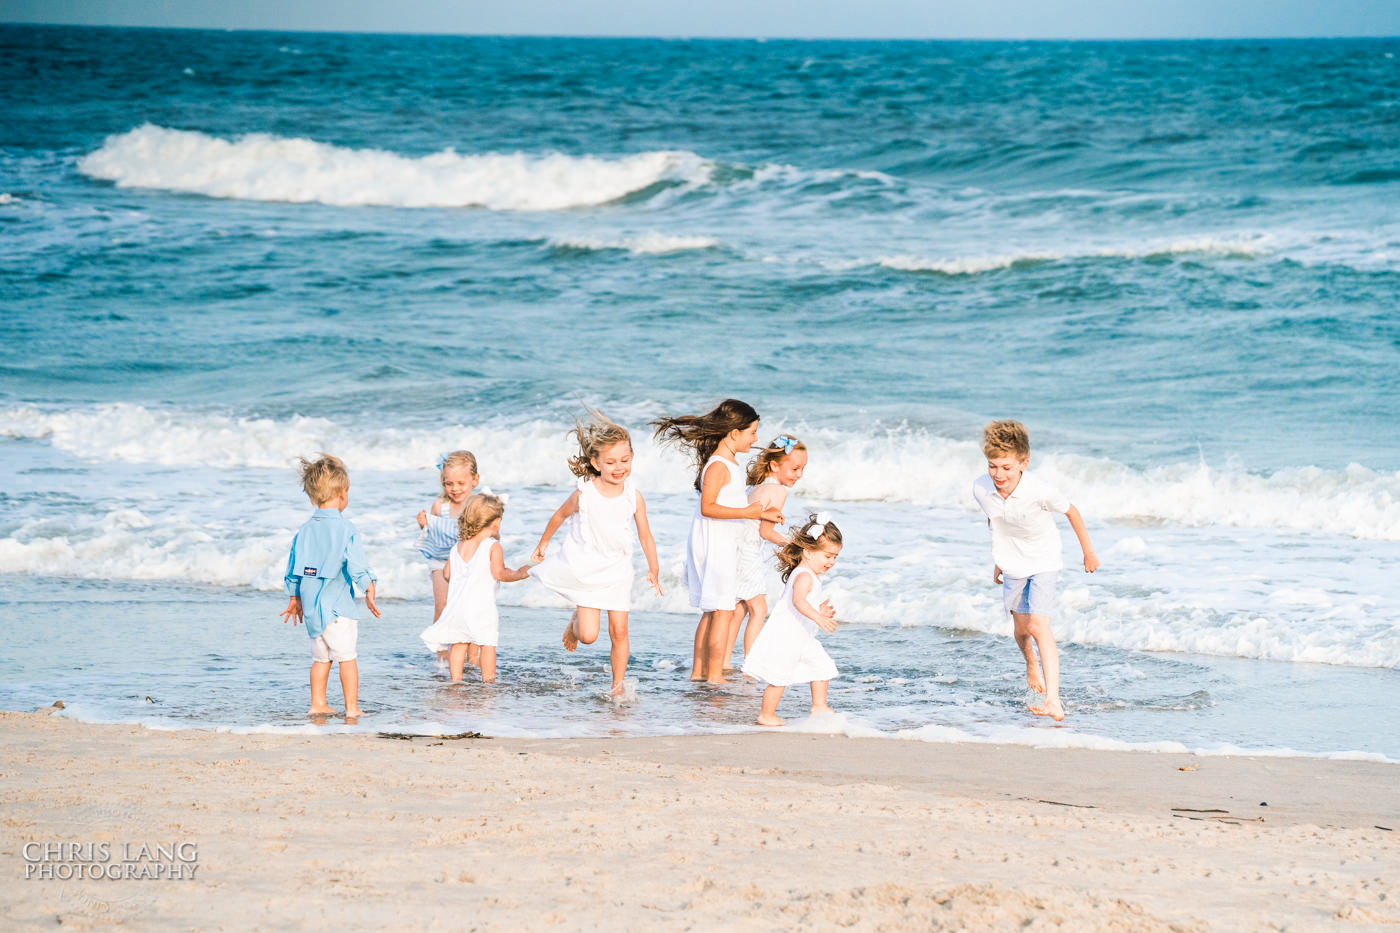 Kids playing on the beach-  Topsail Island - Family photo session - Topsail Island Photographers - Chris Lang Photography - Topsail Island Photos